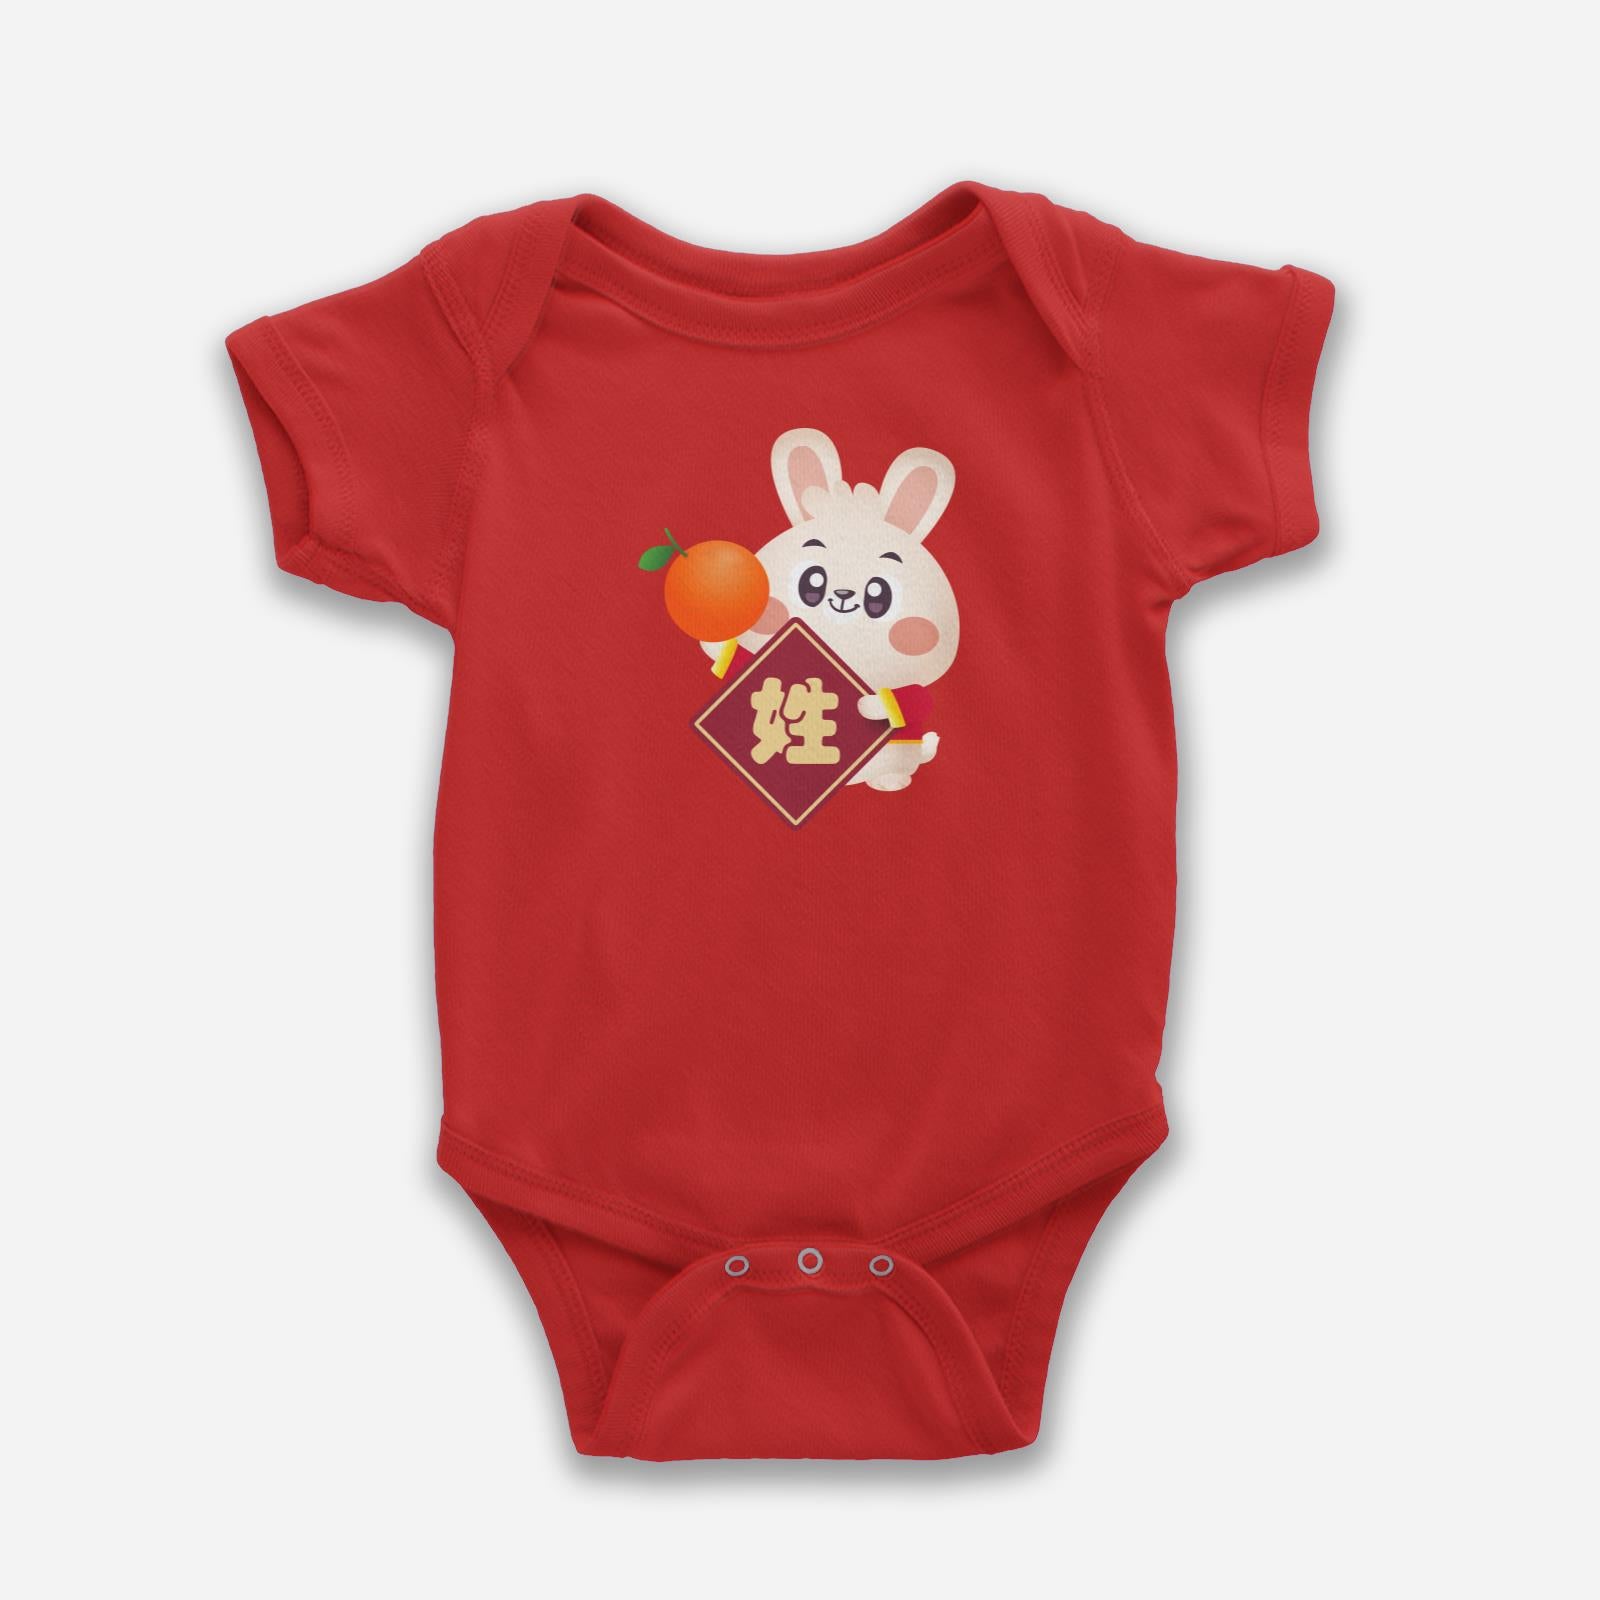 Cny Rabbit Family - Surname Brother Rabbit Baby Romper with Chinese Surname